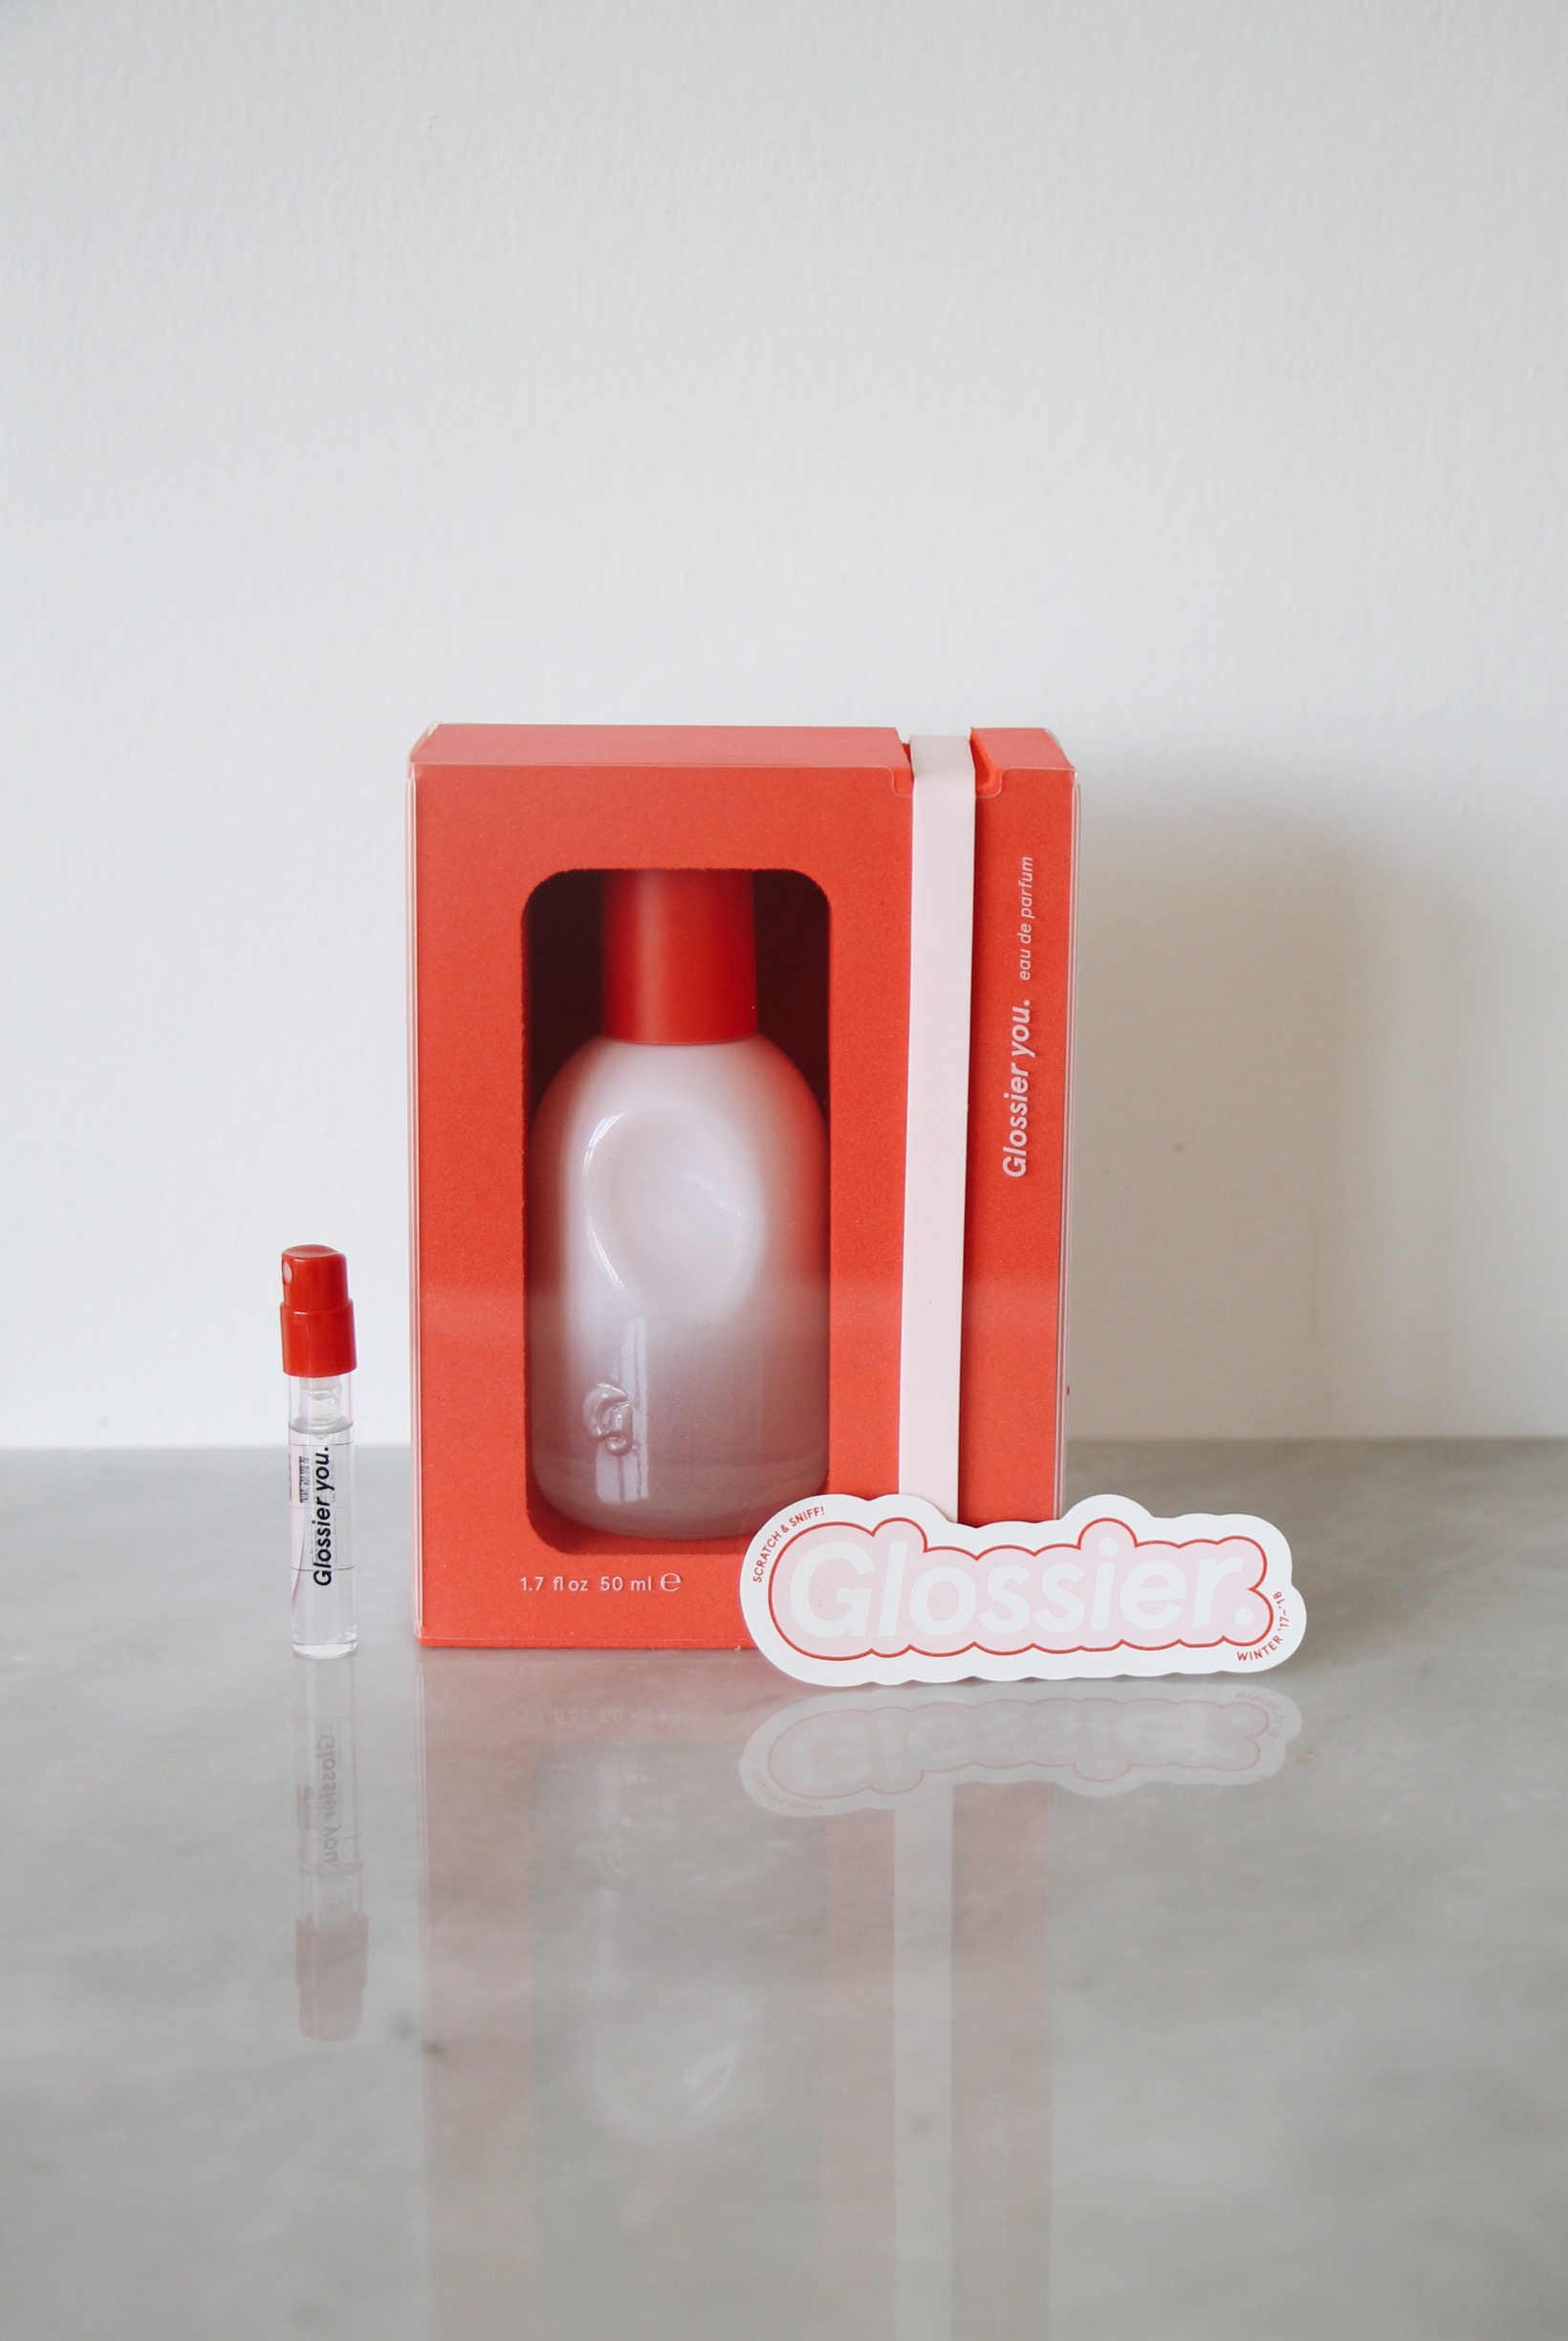 Glossier's New Fragrance: Glossier You